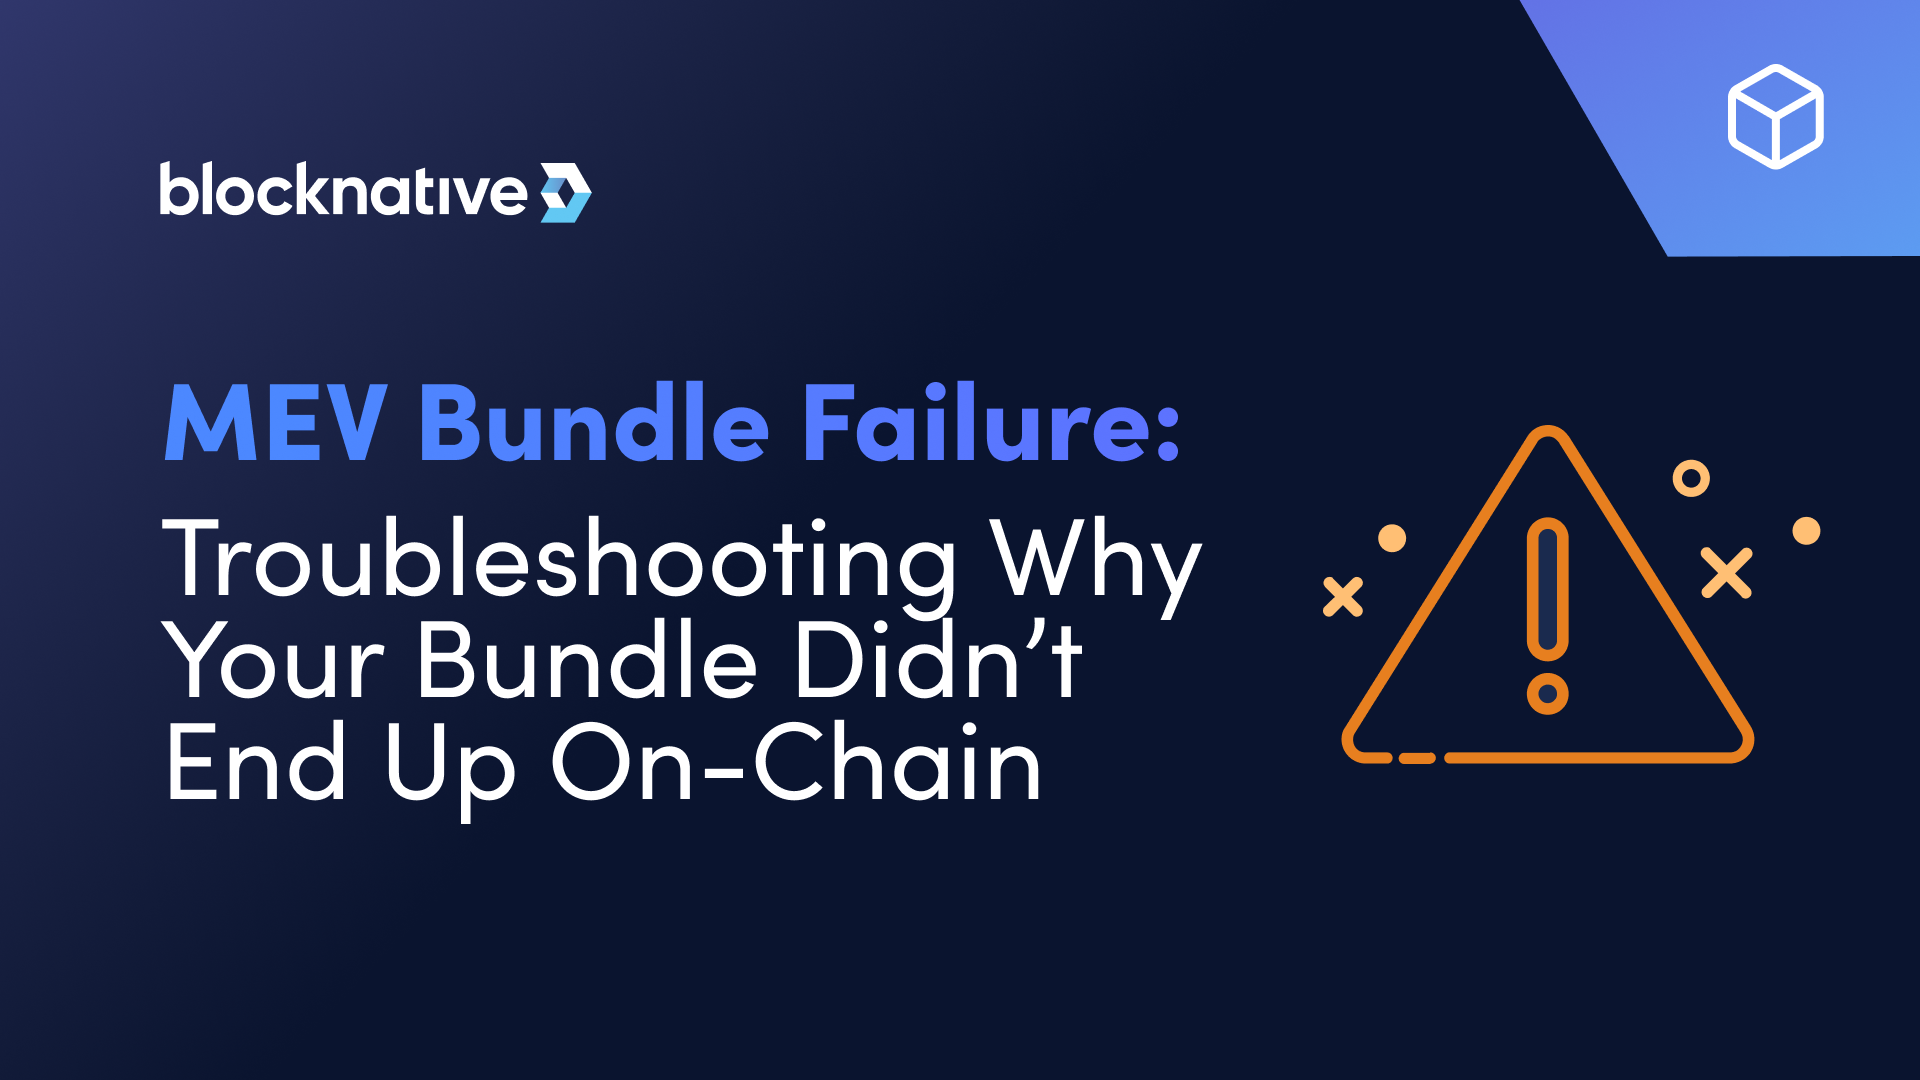 MEV Bundle Failure: Troubleshooting Why Your Bundle Didn’t End Up On-Chain